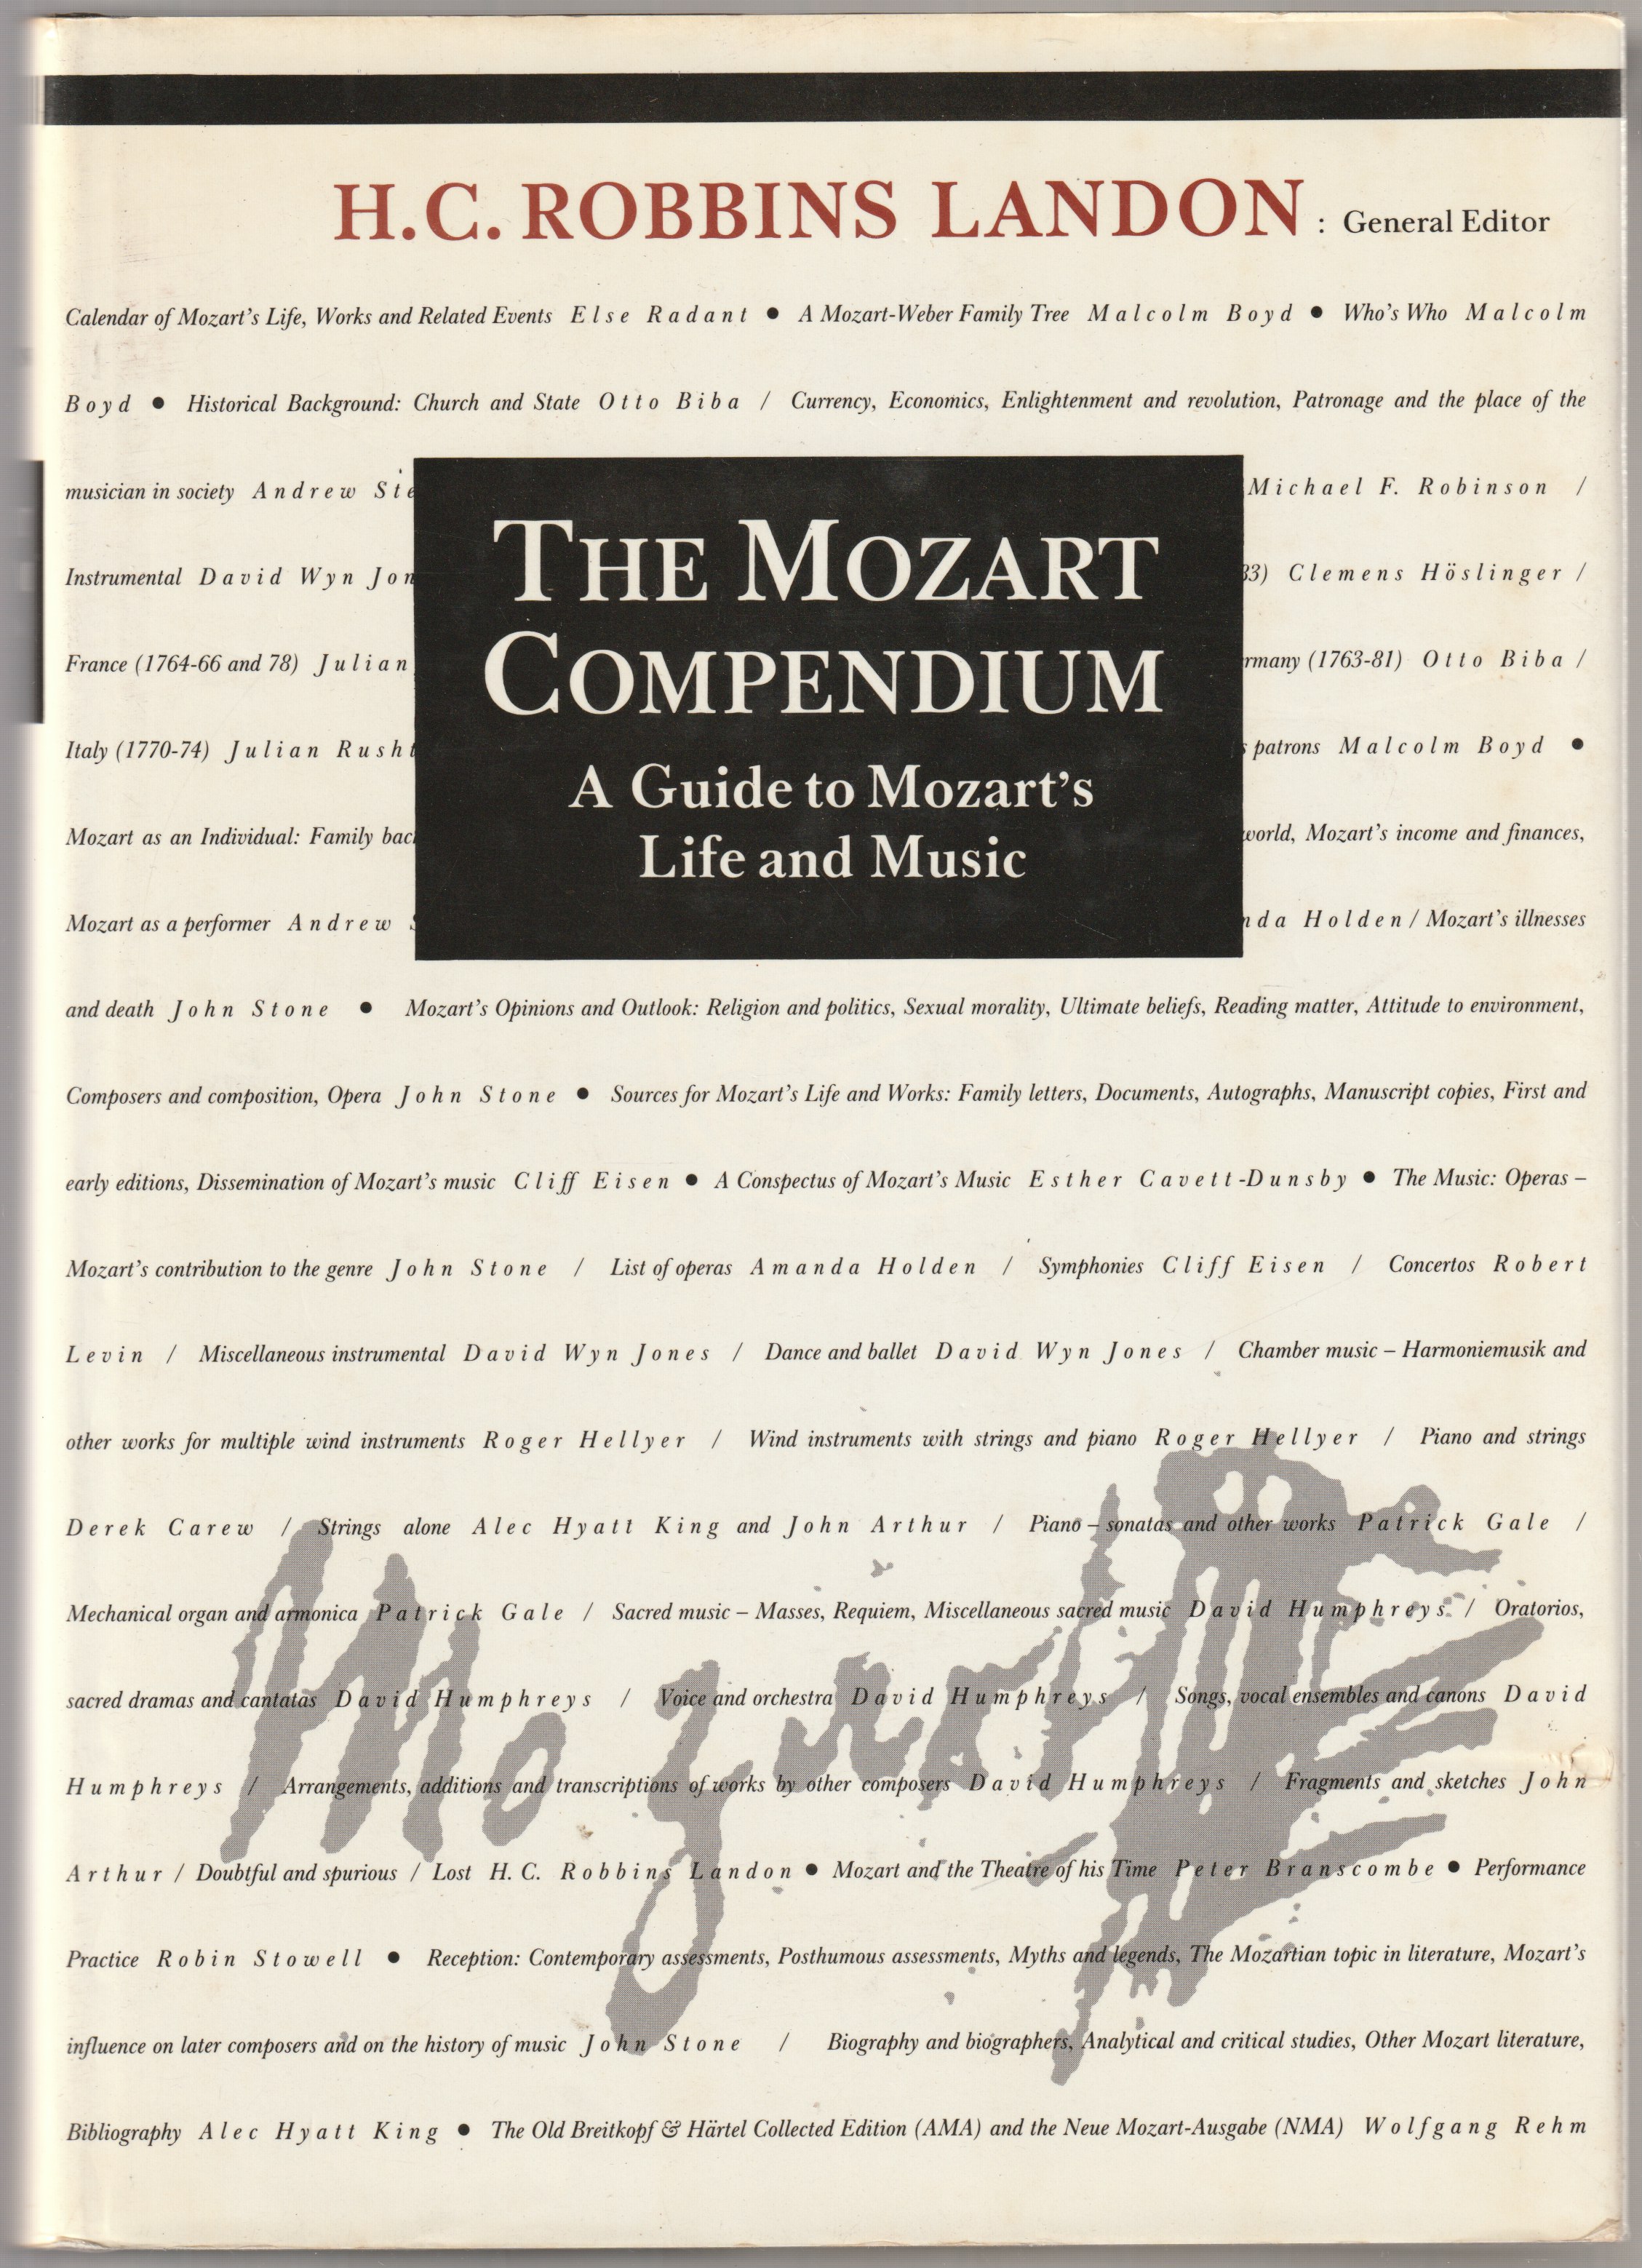 The Mozart compendium : a guide to Mozart's life and music.